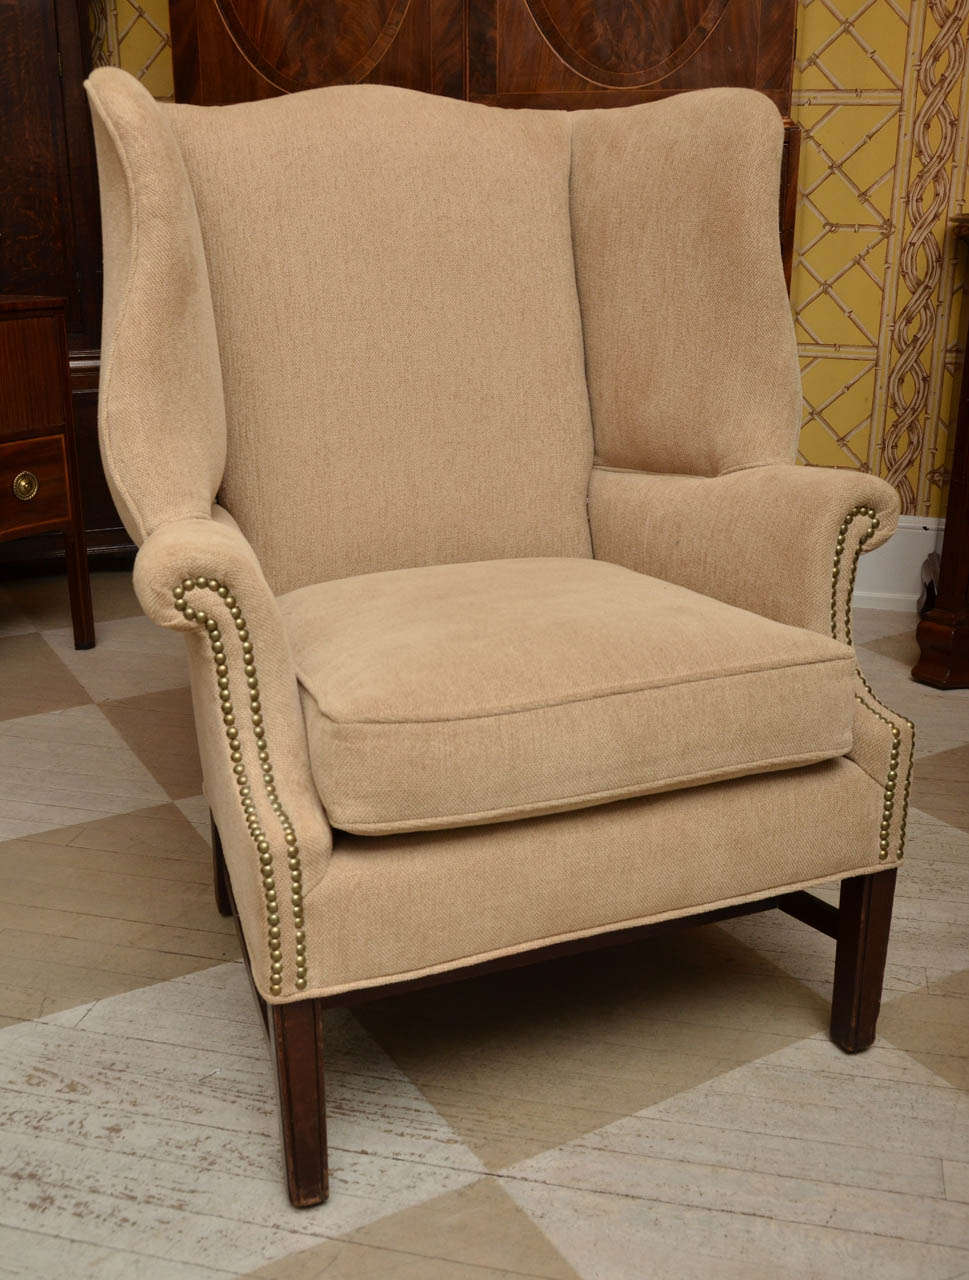 English Georgian Style mahogany wing chair. There is another chair almost exactly the same. These chairs came in as a pair and we upholstered them in the same fabric and show them as a pair. Posted is only for sale, since there are very slight